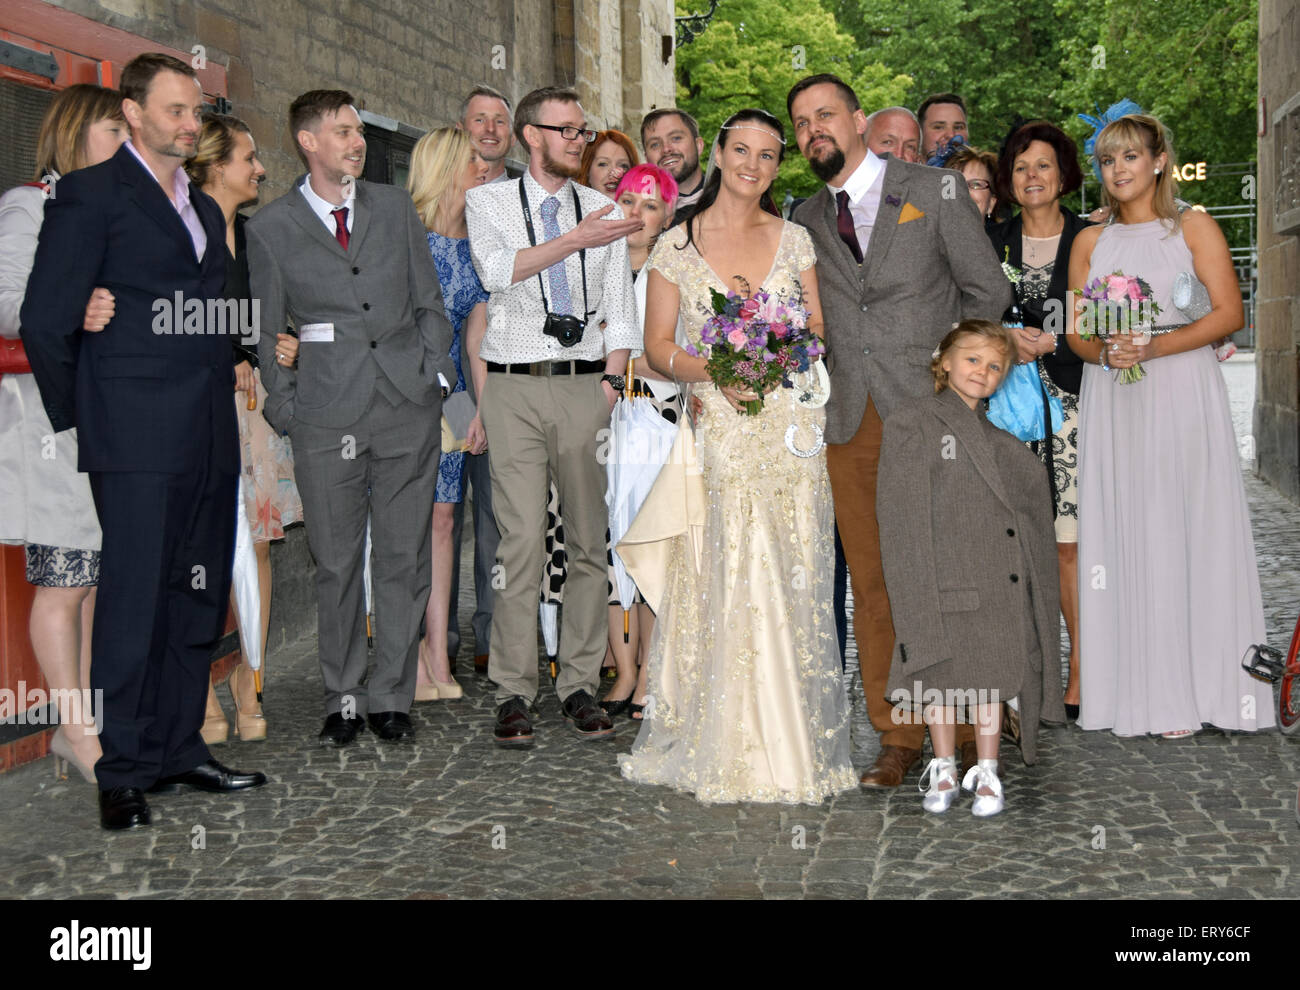 A British wedding party having a group photo taken at their destination wedding in Brugge, Belgium Stock Photo